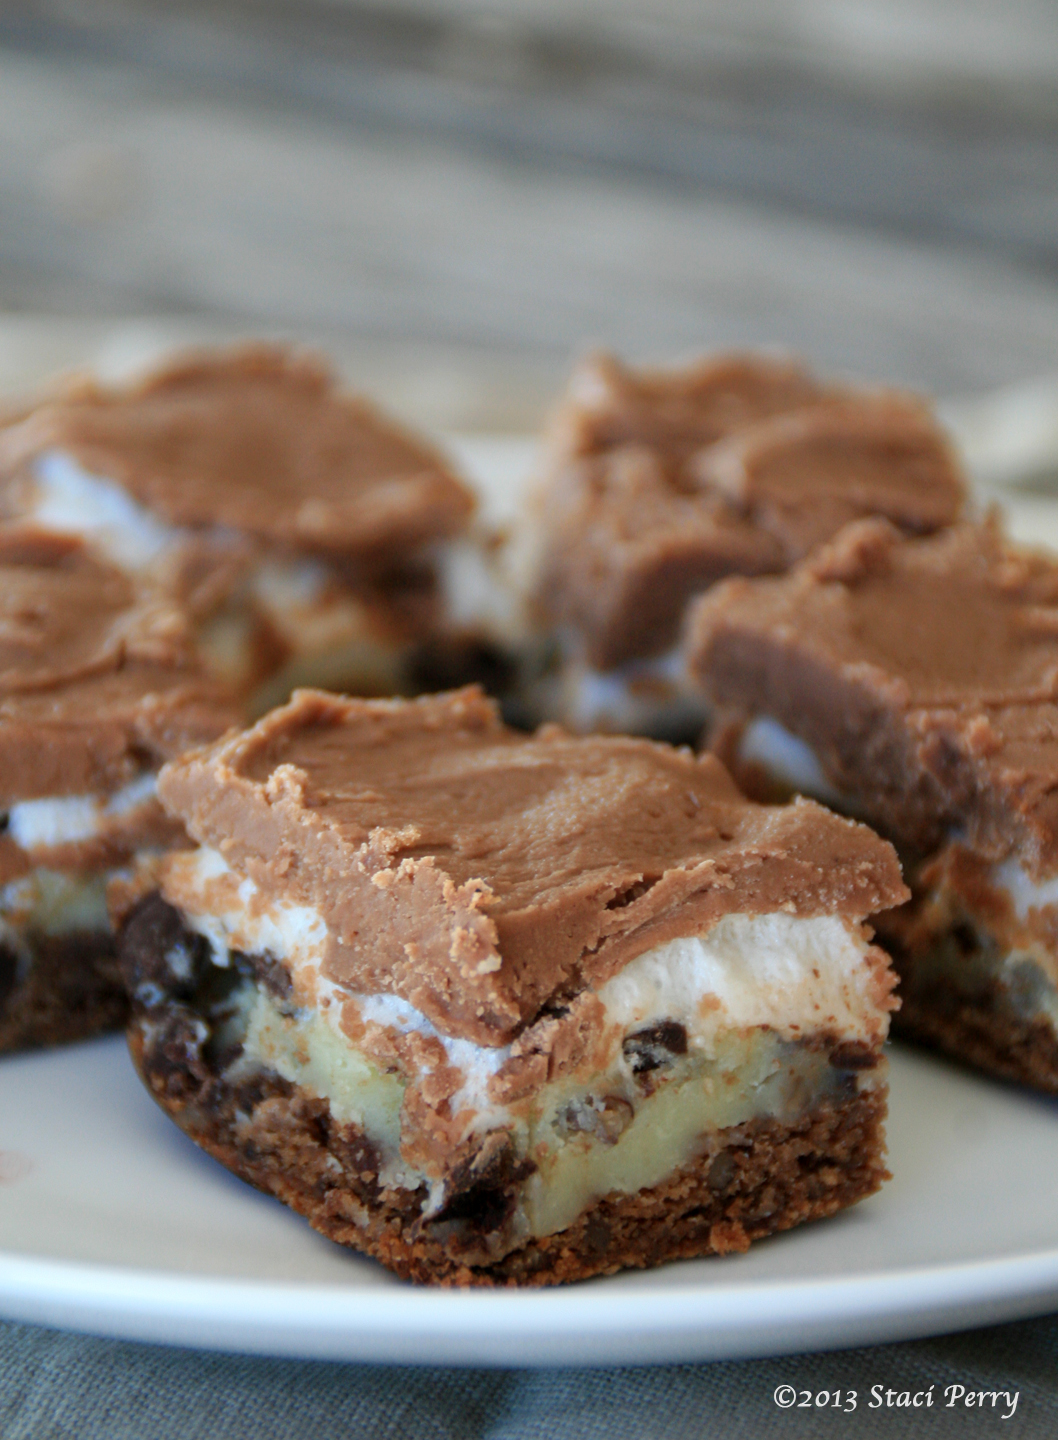 What’s In the Layers? Marshmallow Chocolate Cream Cheese Bars